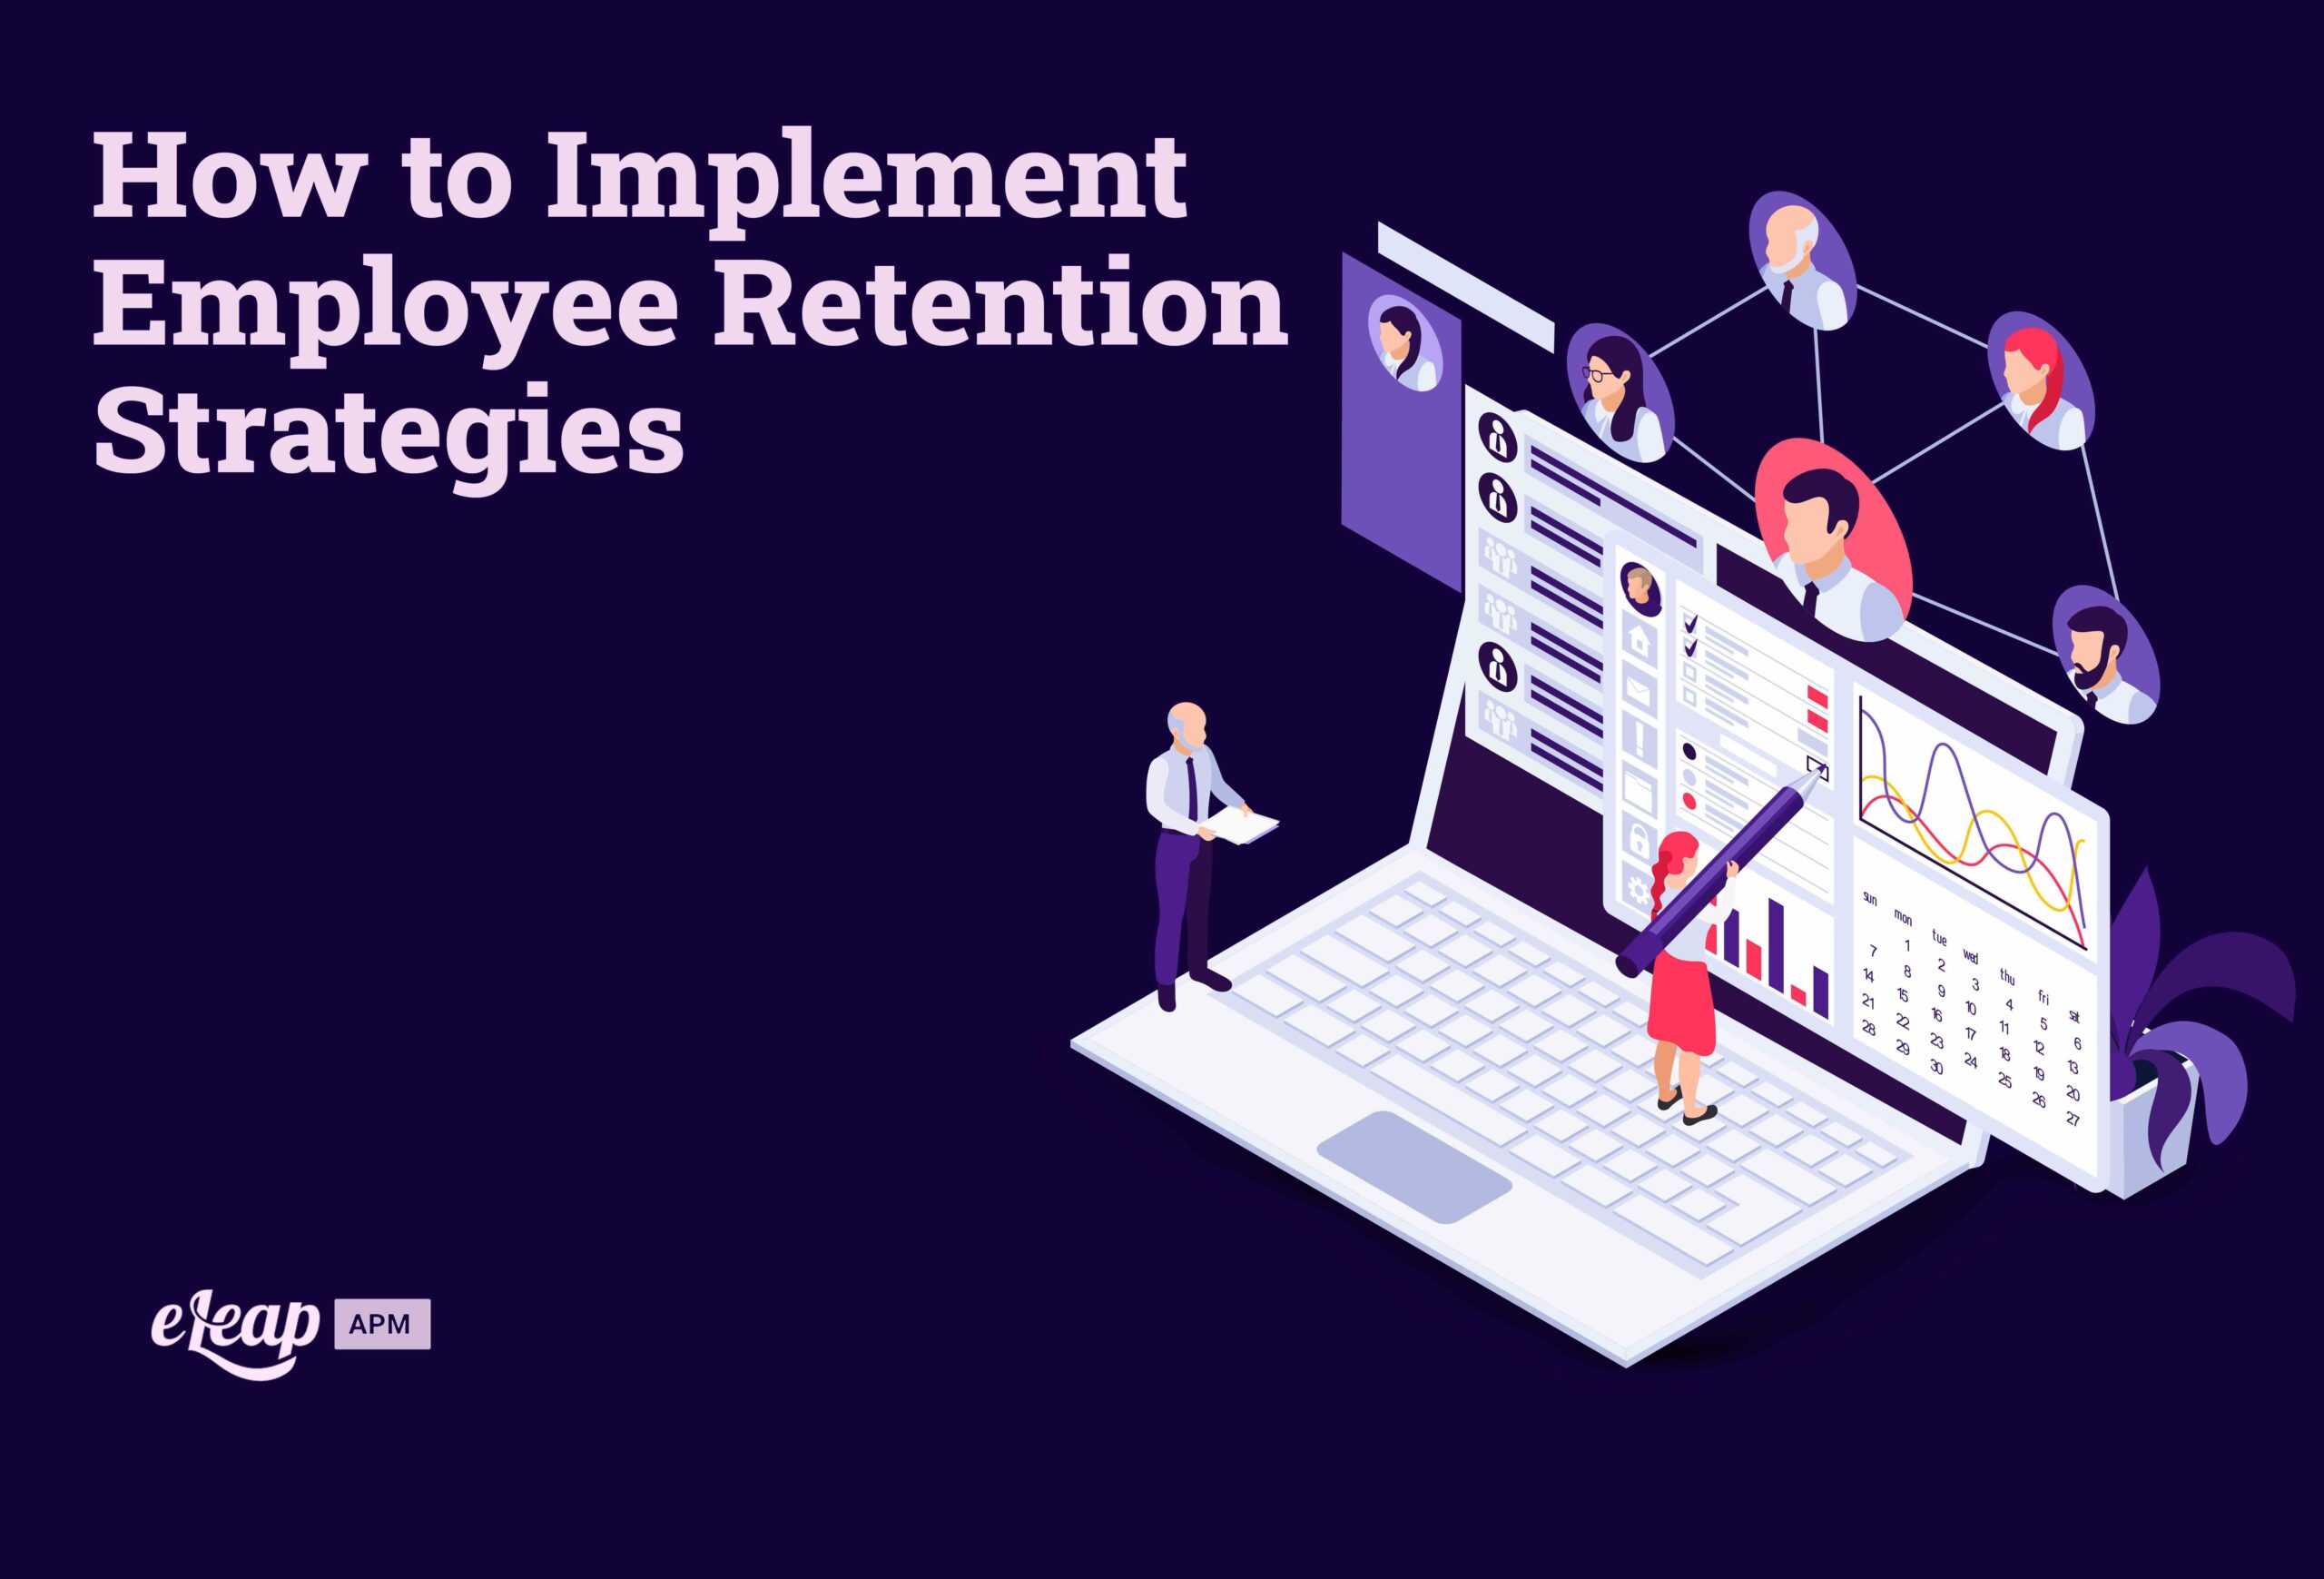 How to Implement Employee Retention Strategies